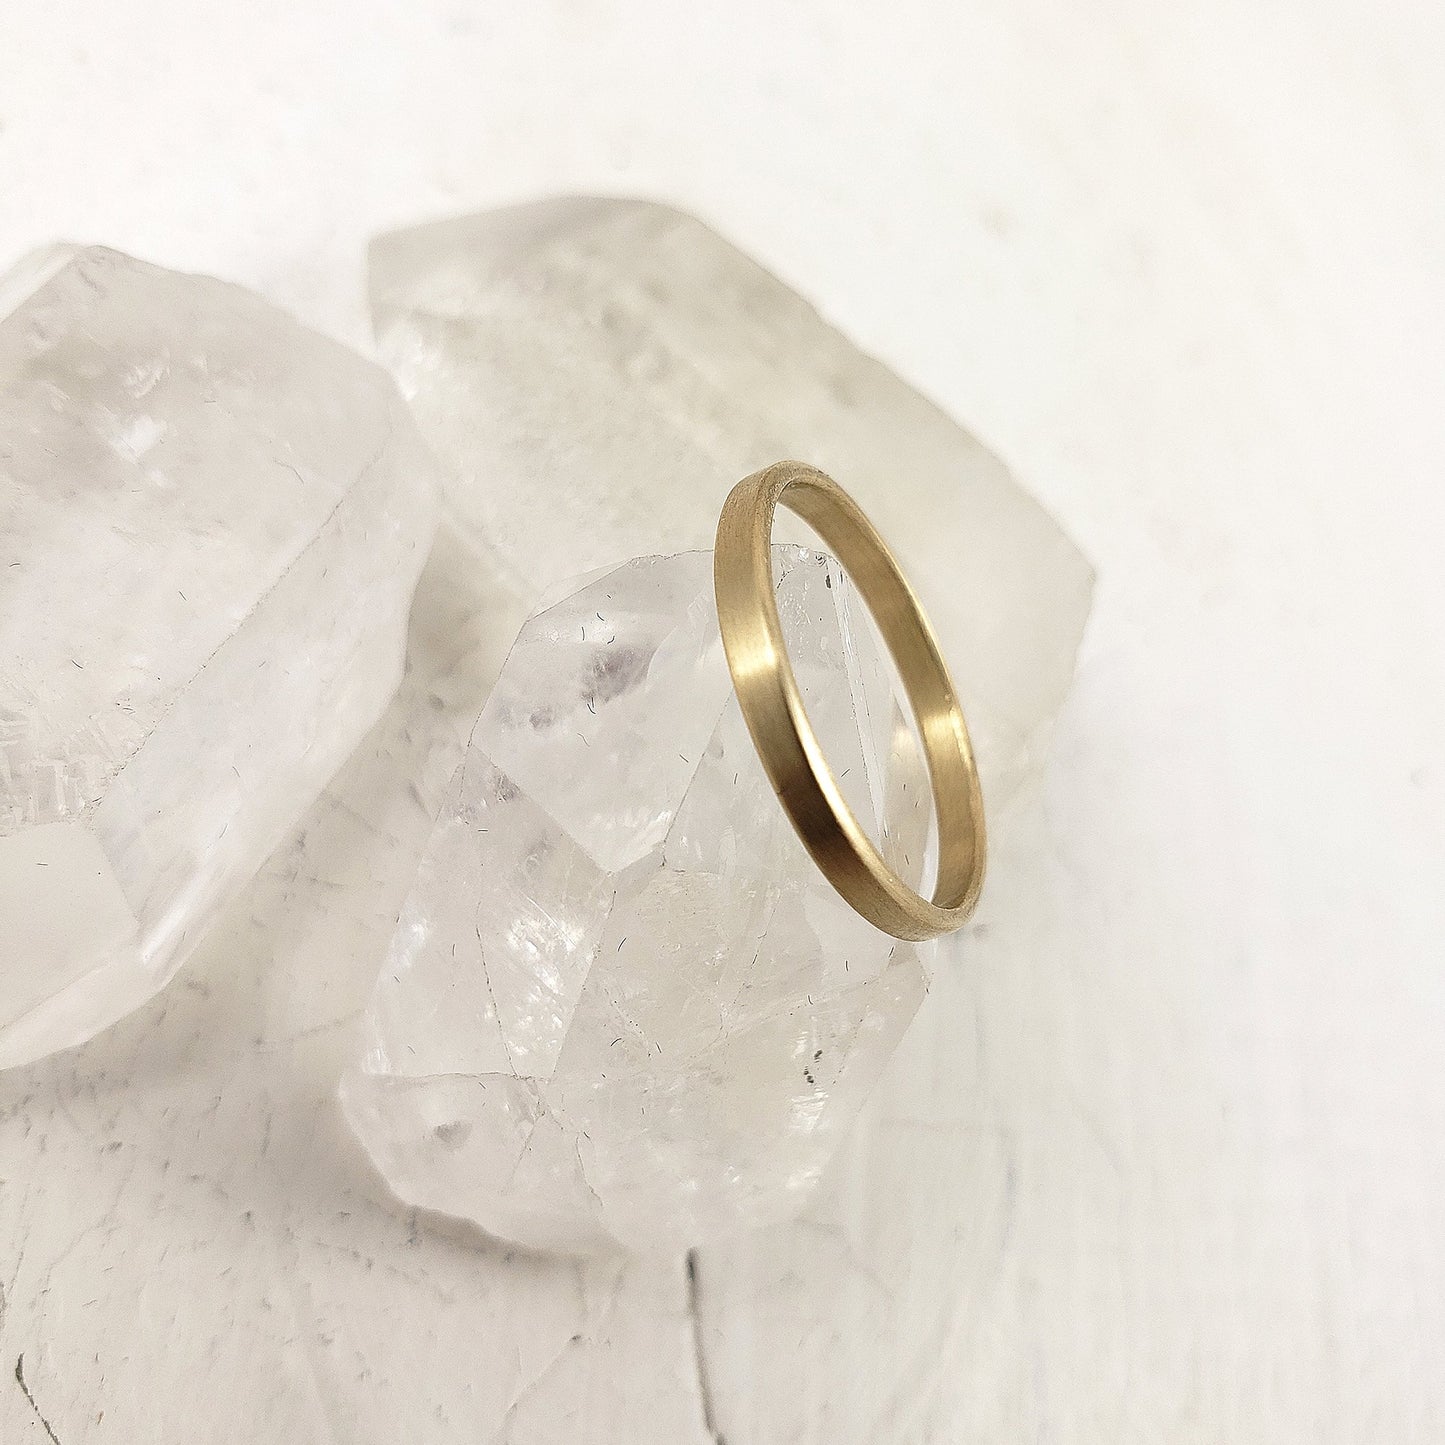 Handmade in Canada solid 10k, 14 k or 18k yellow gold wedding band